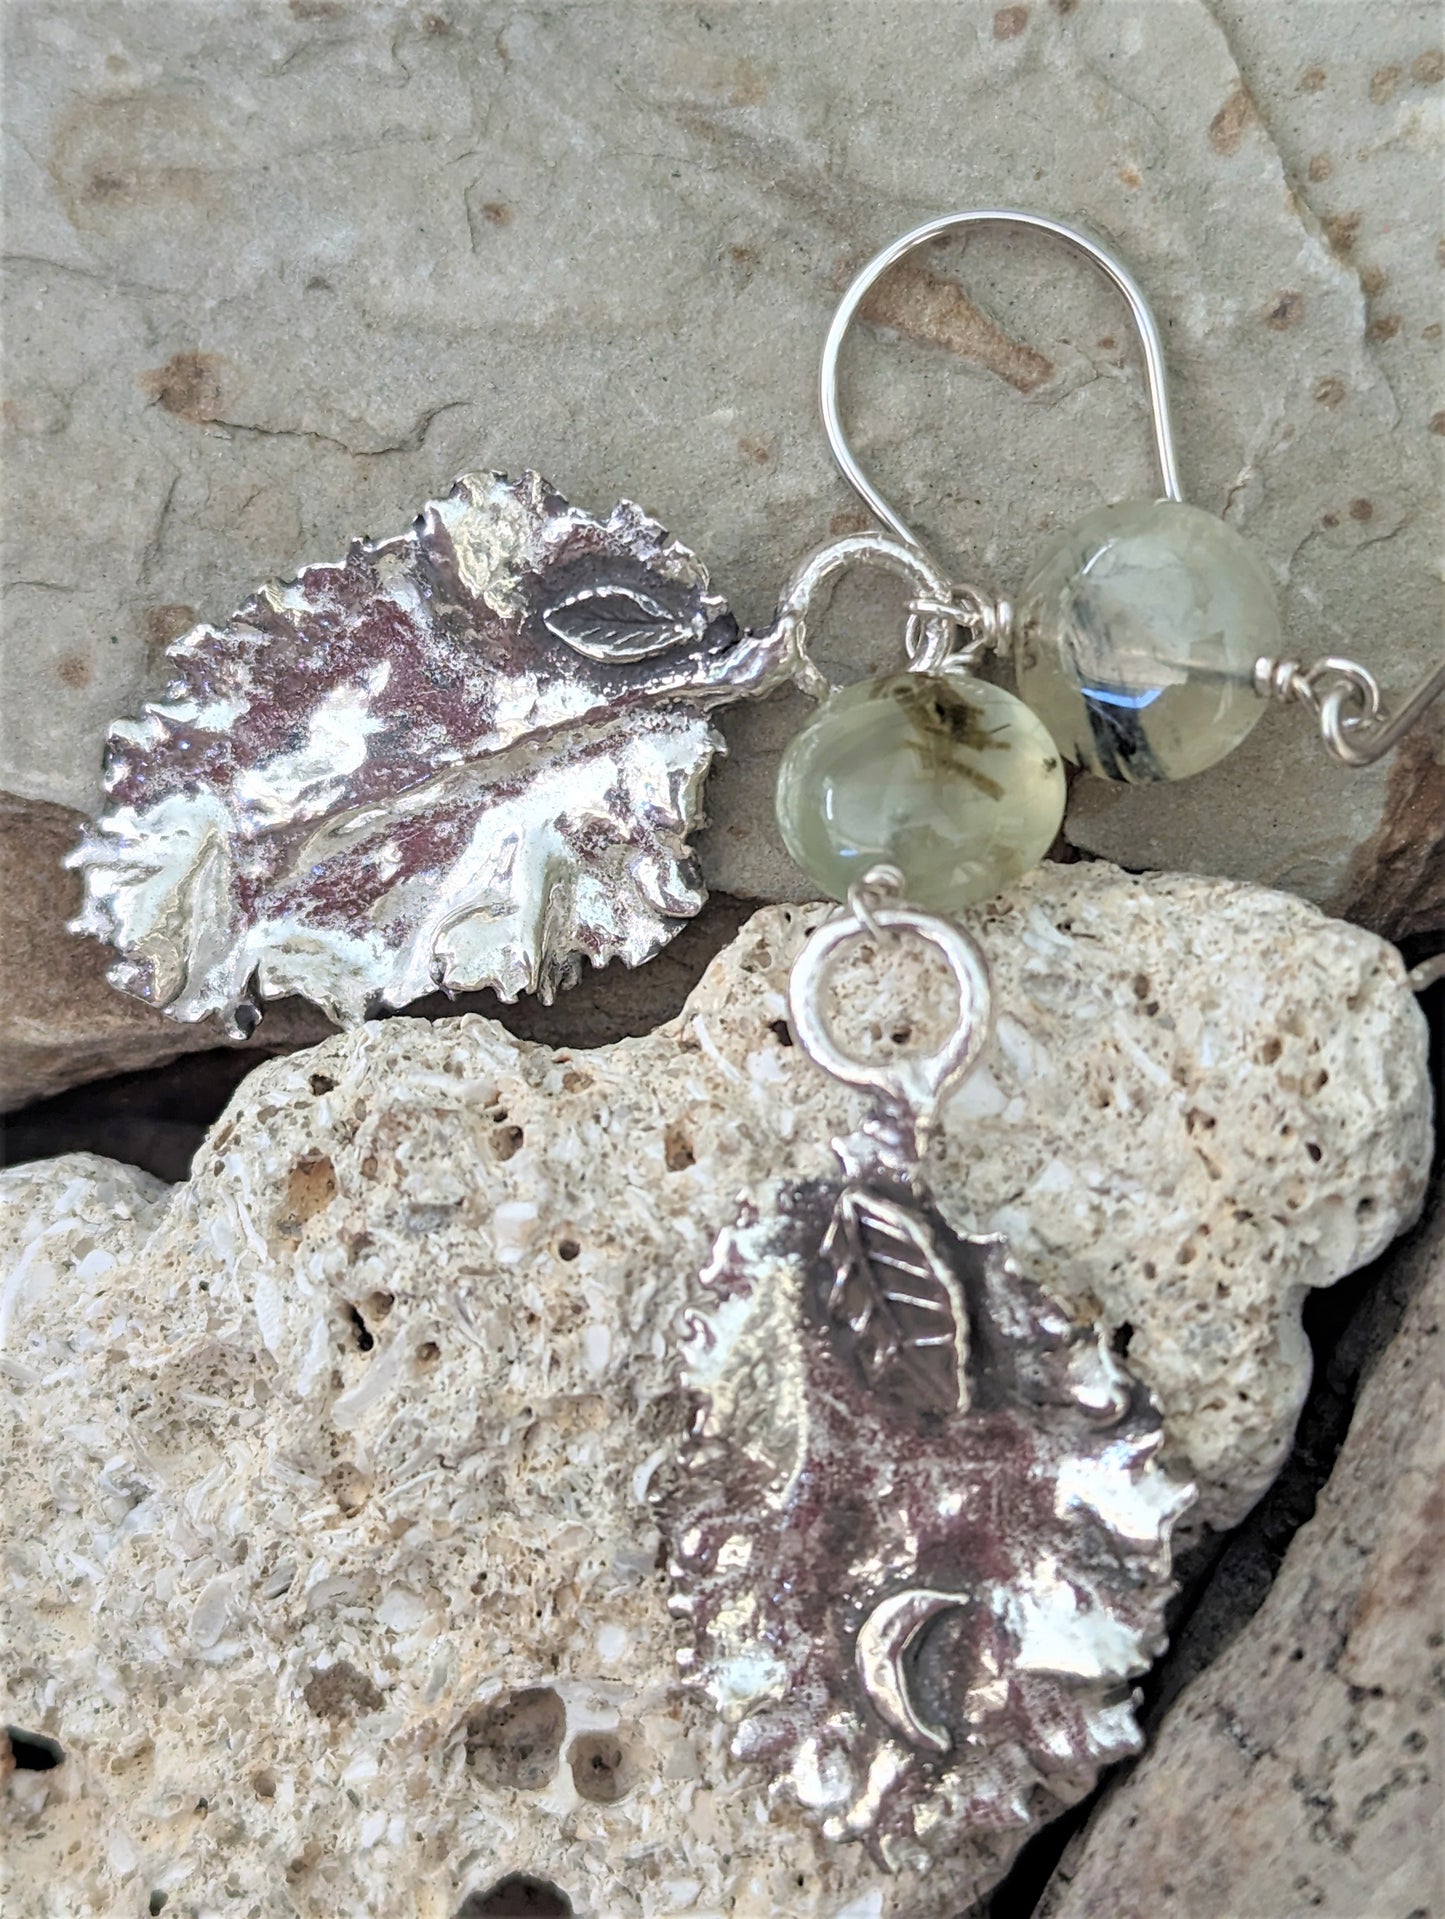 Silver Baby Curly Kale Leaf with Moss Agate Dangle Earrings